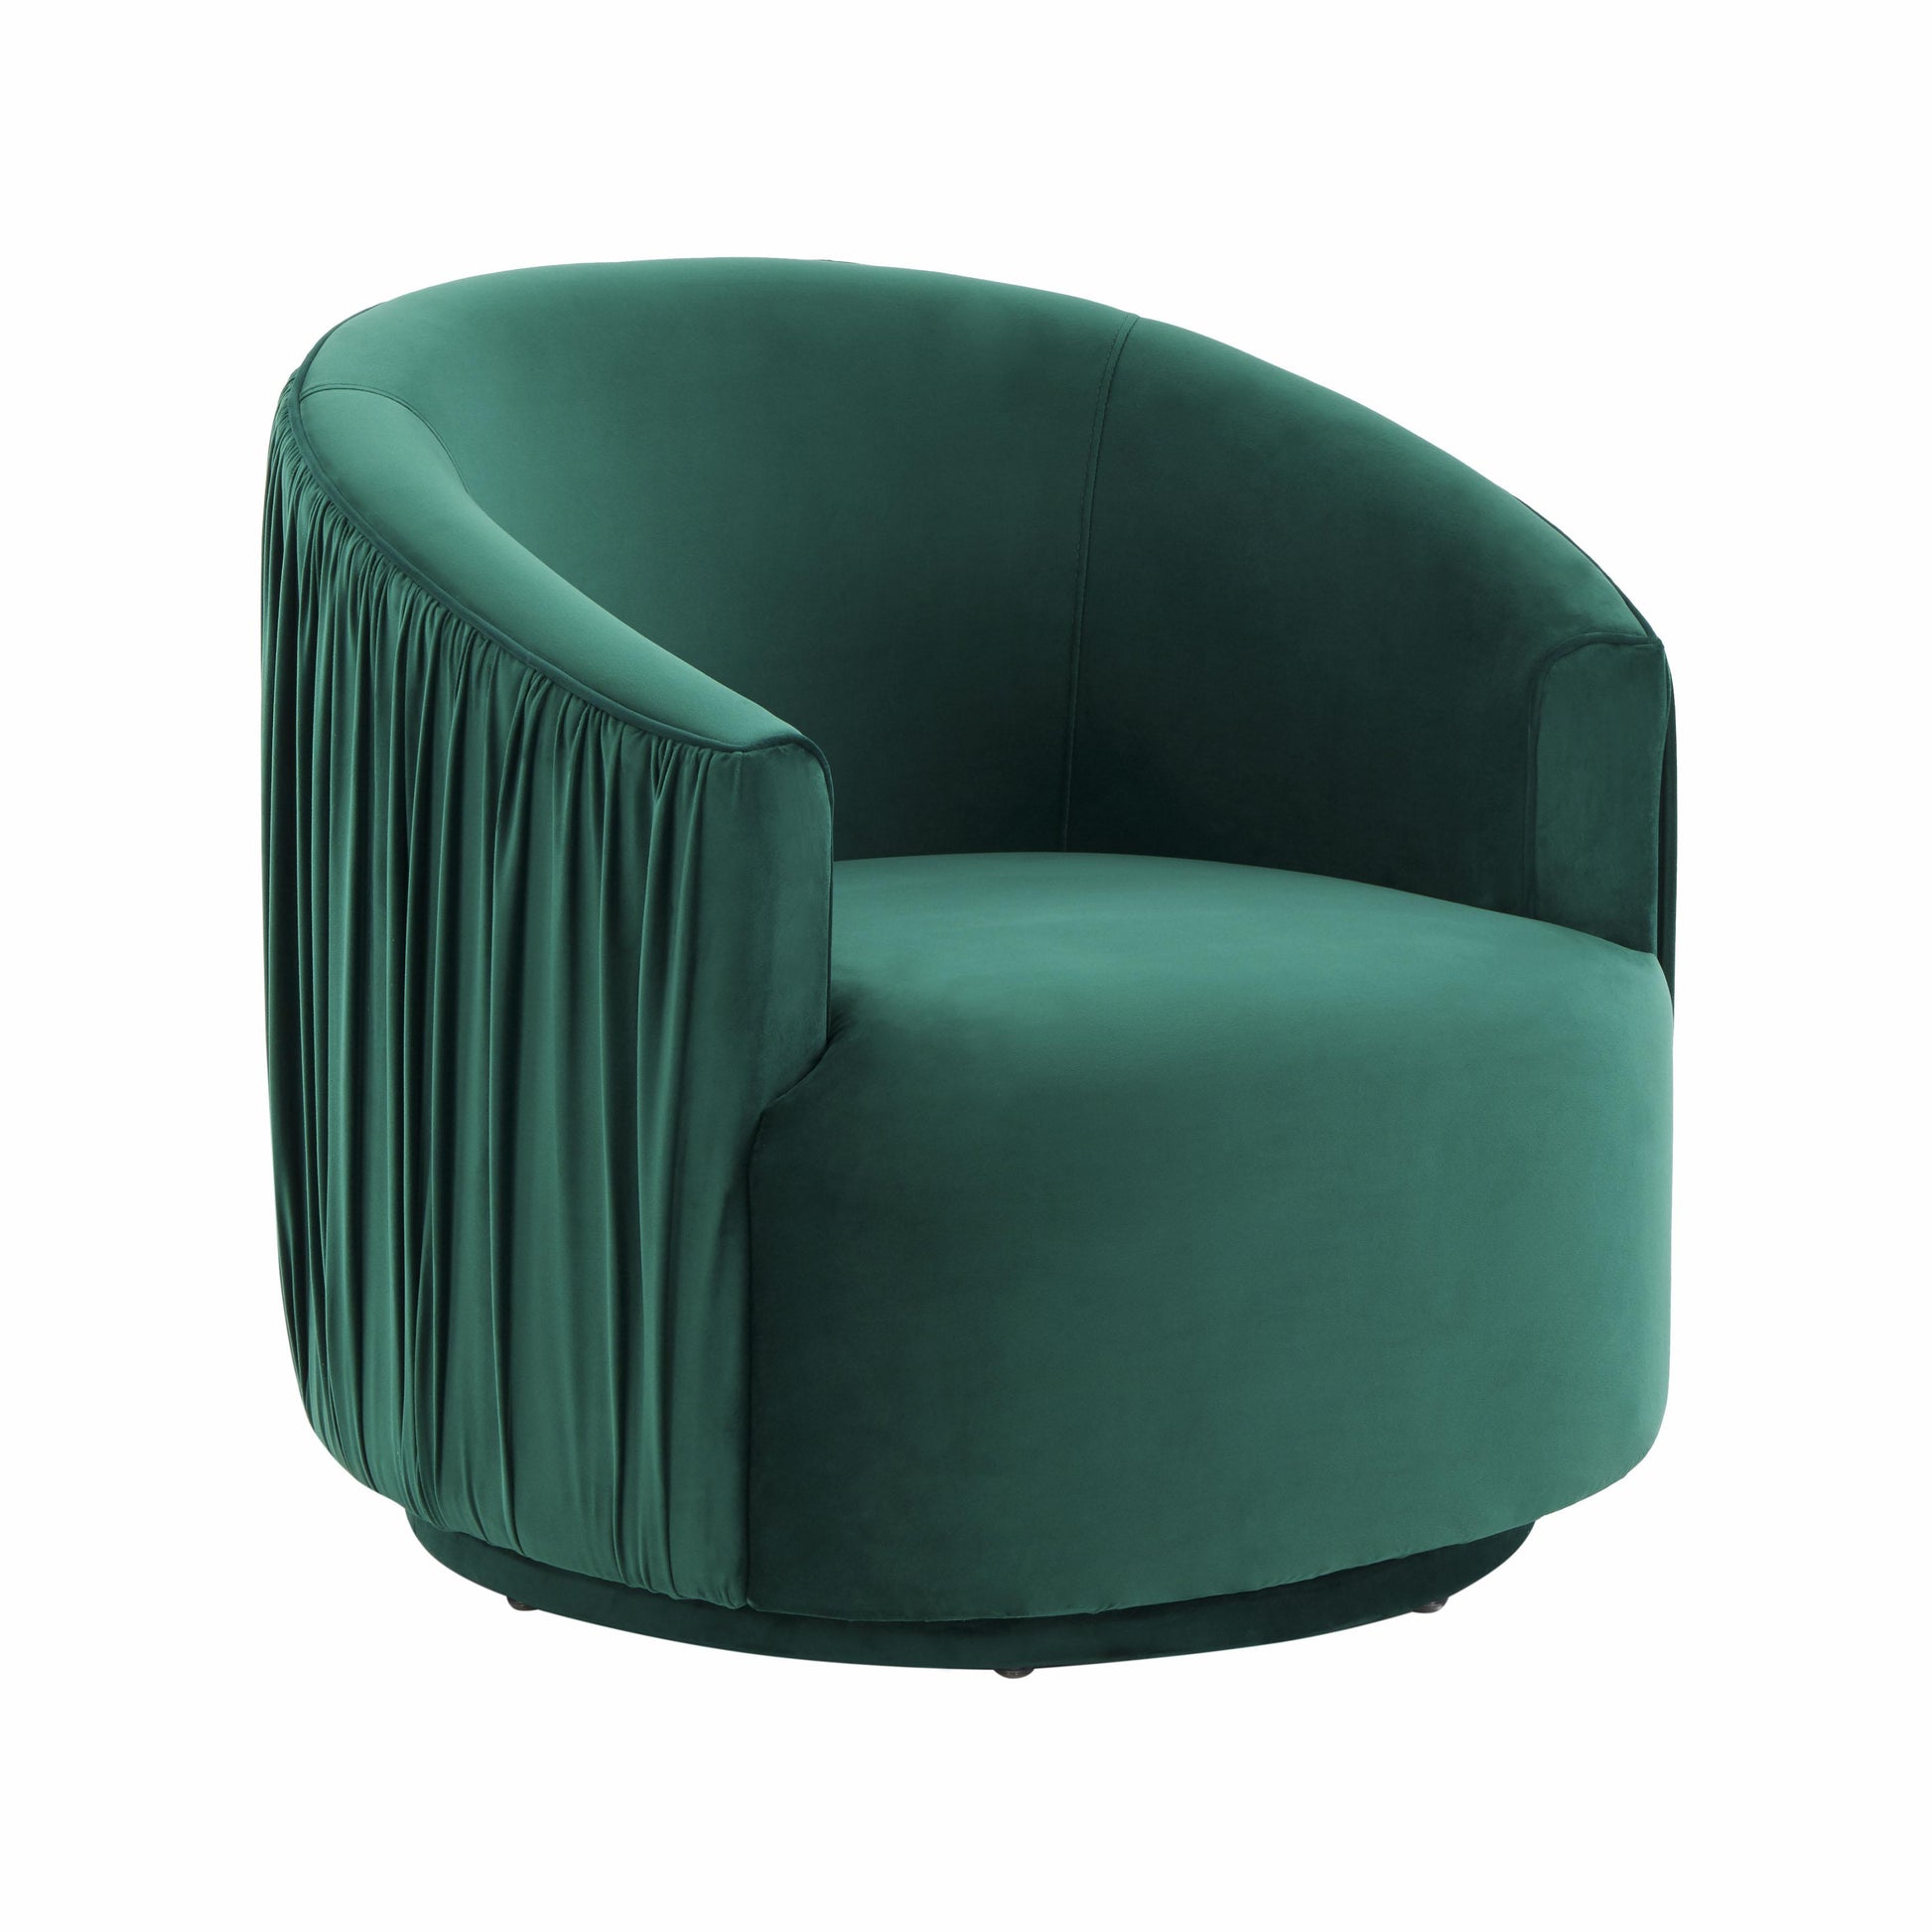 Tov Furniture London Forest Green Pleated Swivel Chair